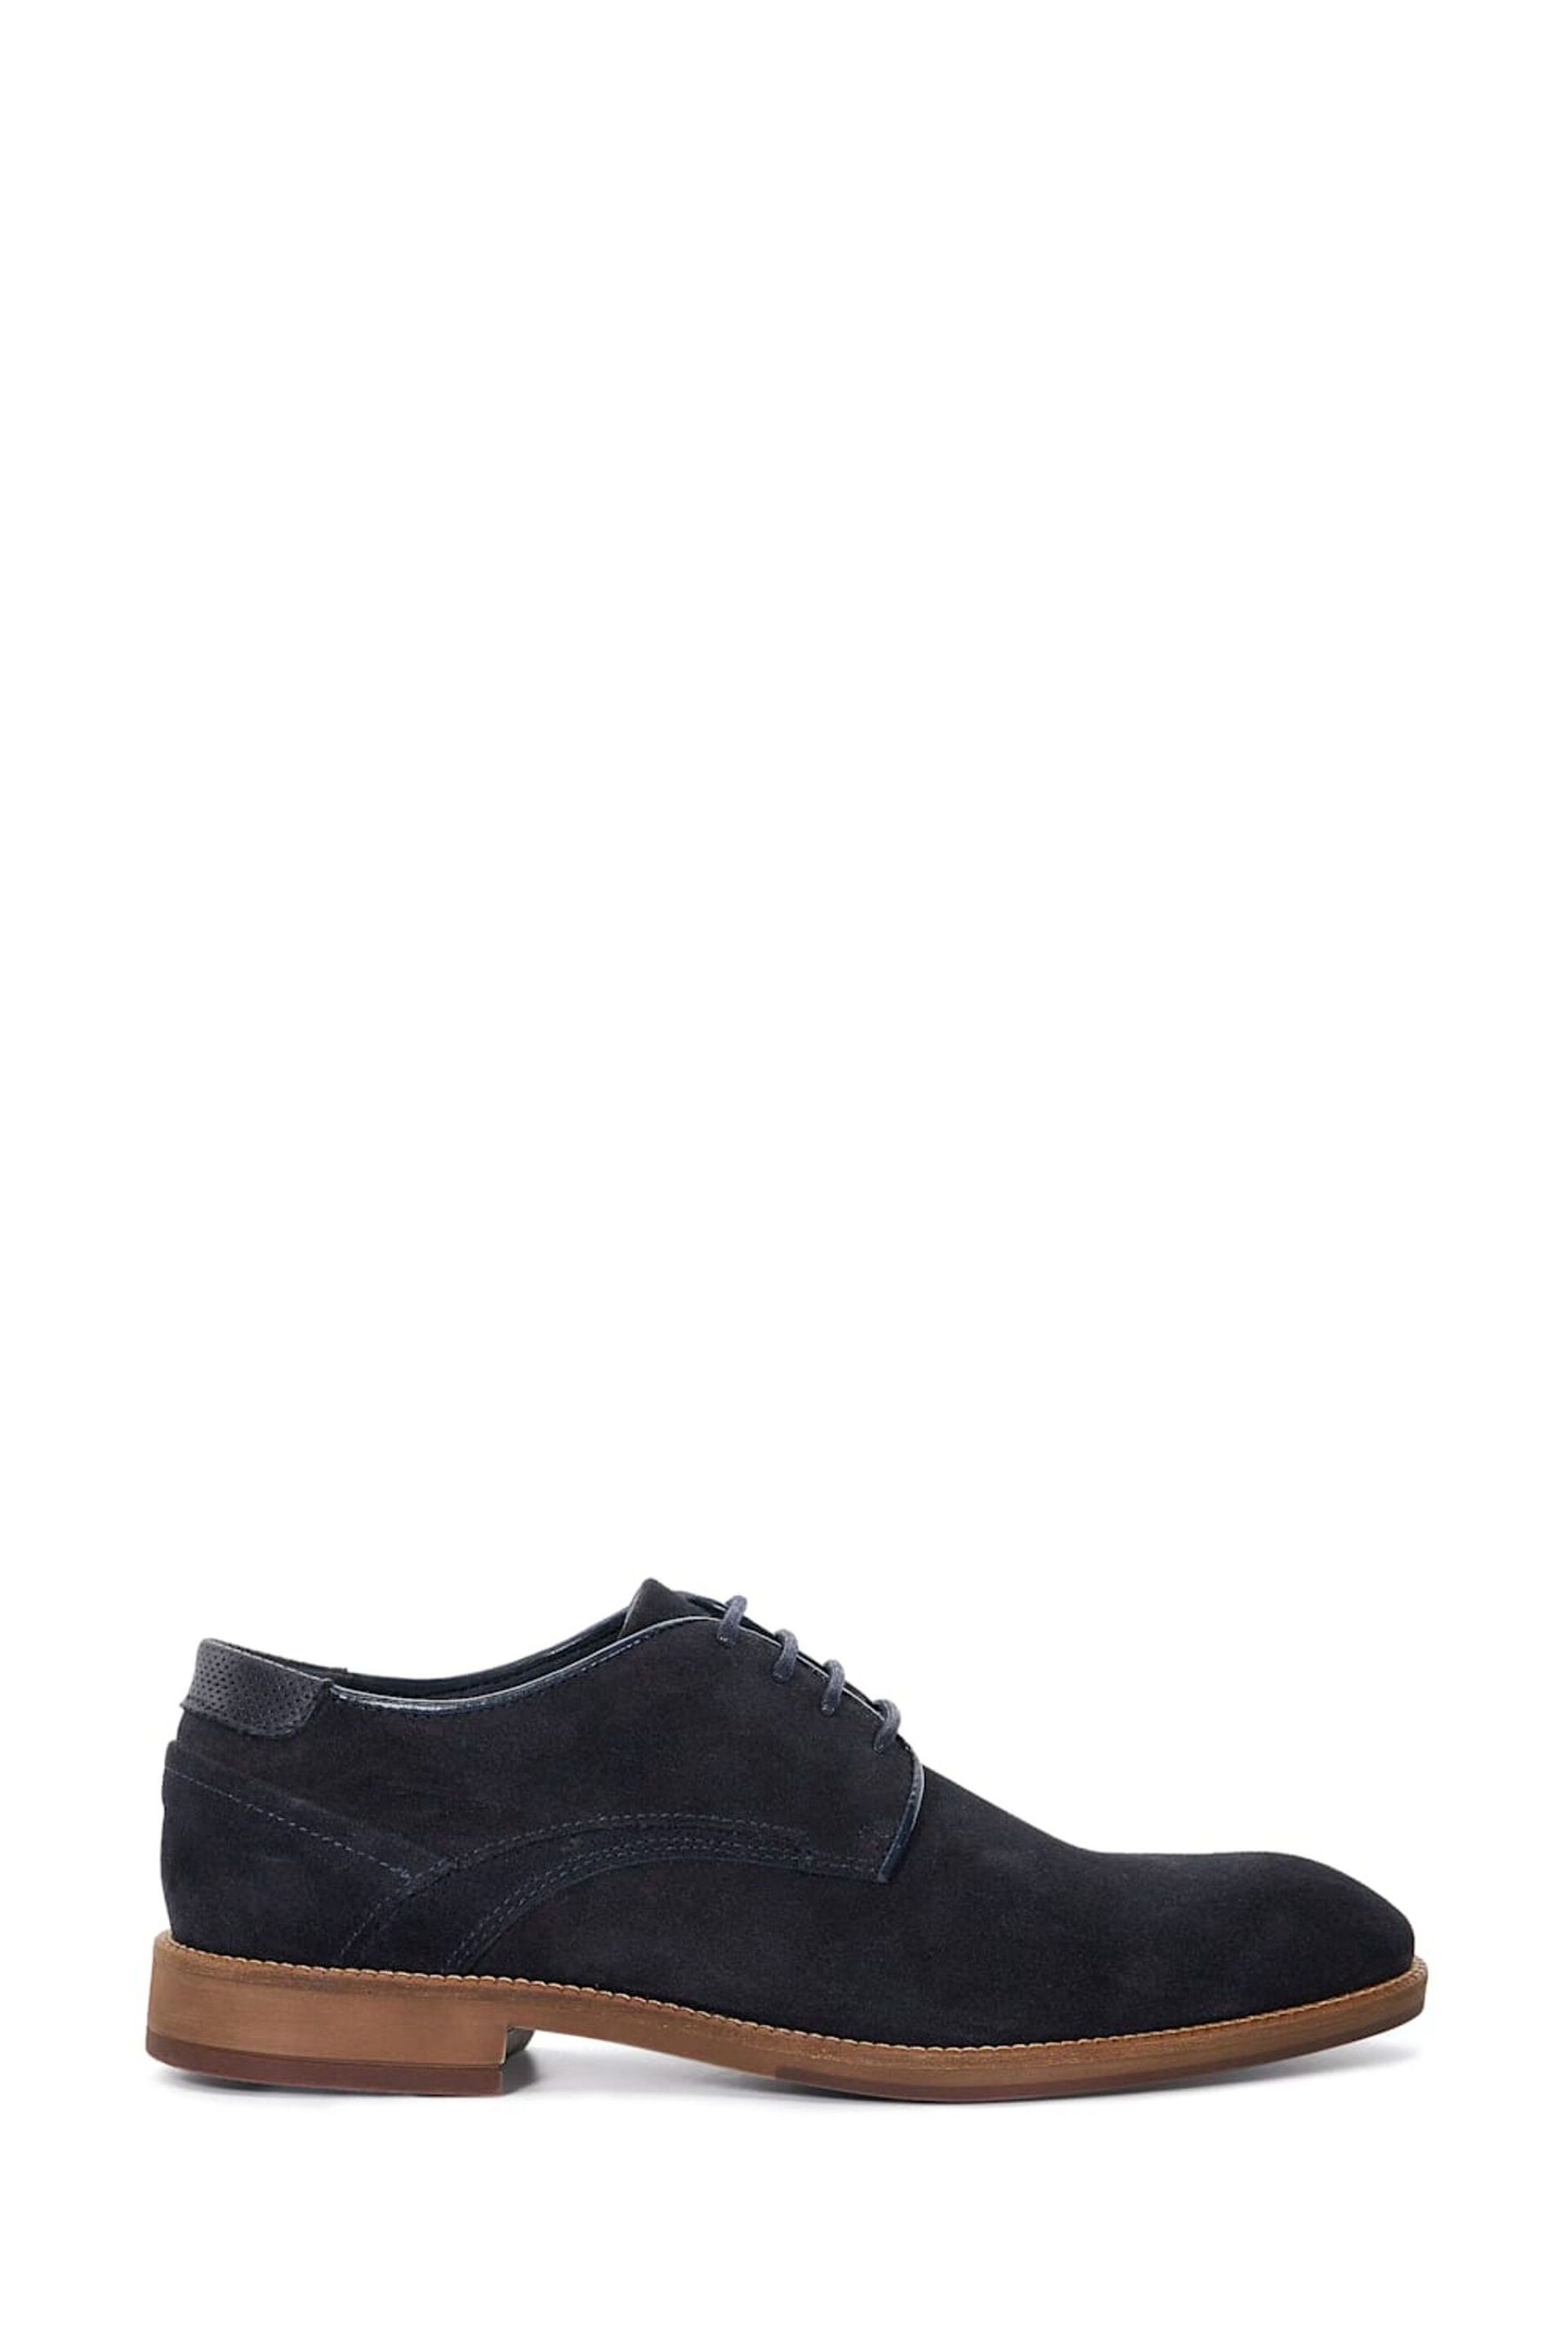 Dune London Blue Bridon Piped Gibson Casual Shoes - Image 1 of 5